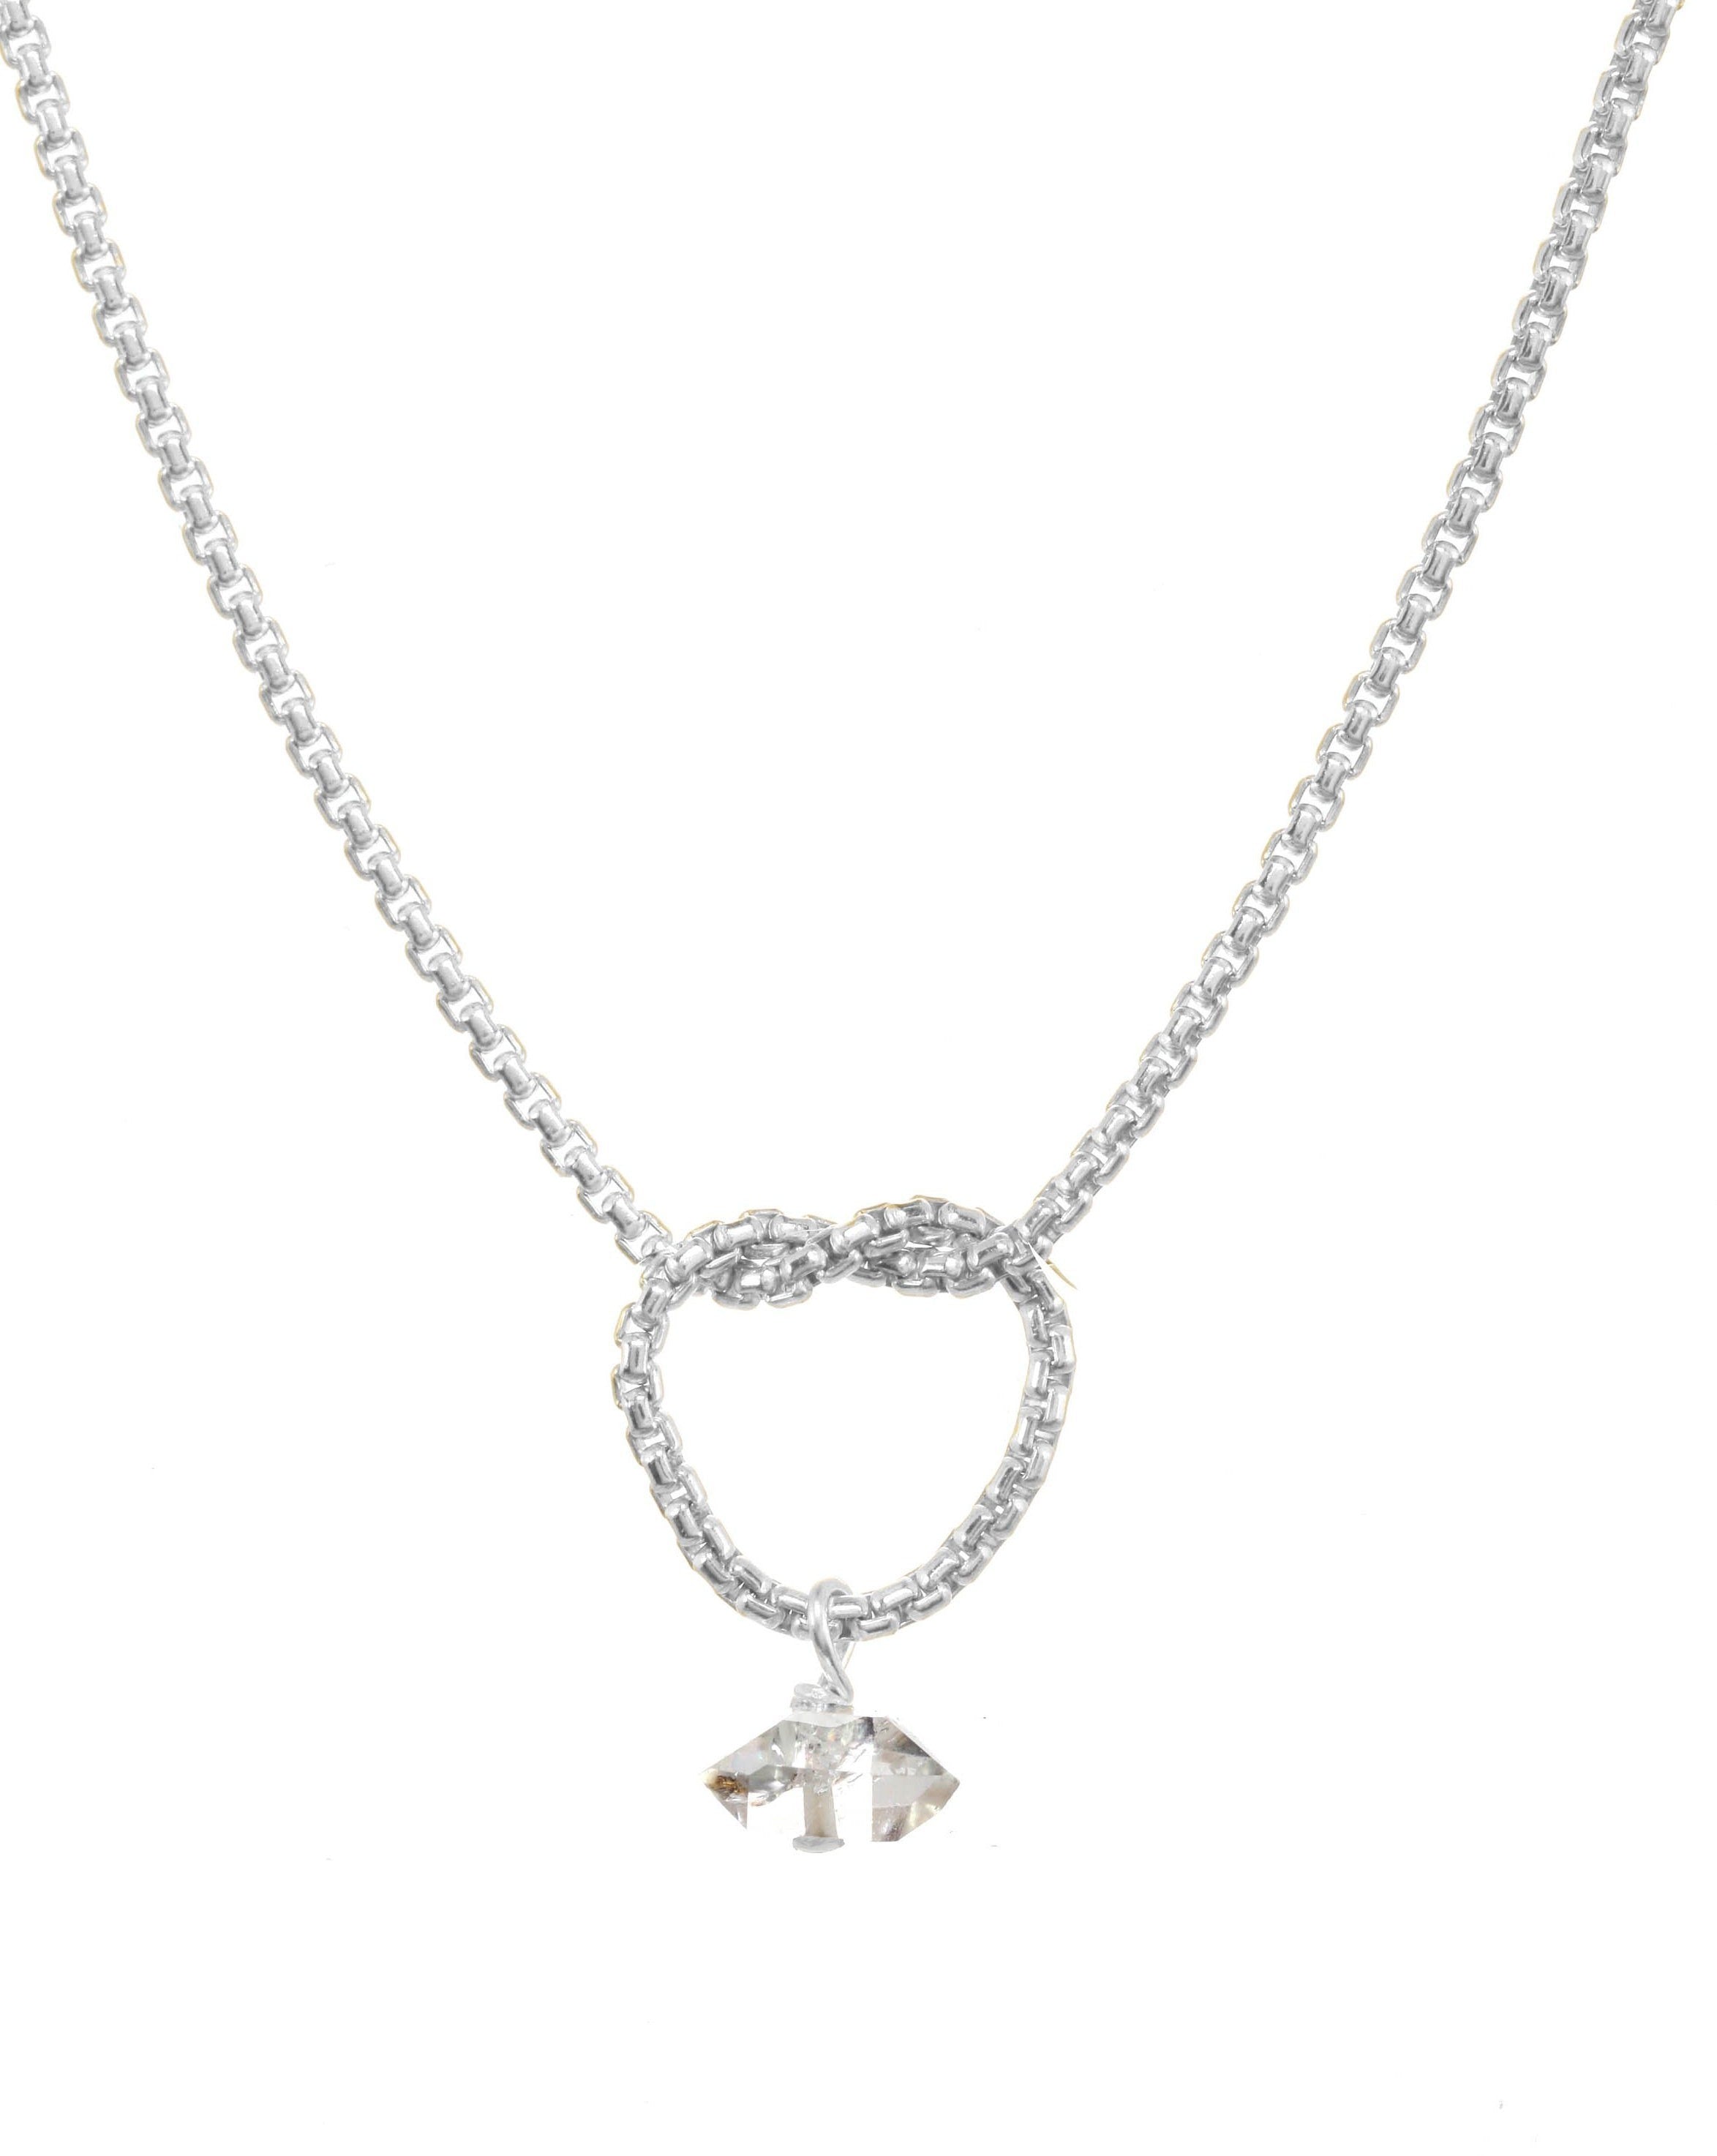 Love Knot Necklace by KOZAKH. A 16 to 18 inch adjustable length necklace, crafted in Sterling Silver, featuring a knot and a faceted Herkimer Diamond.